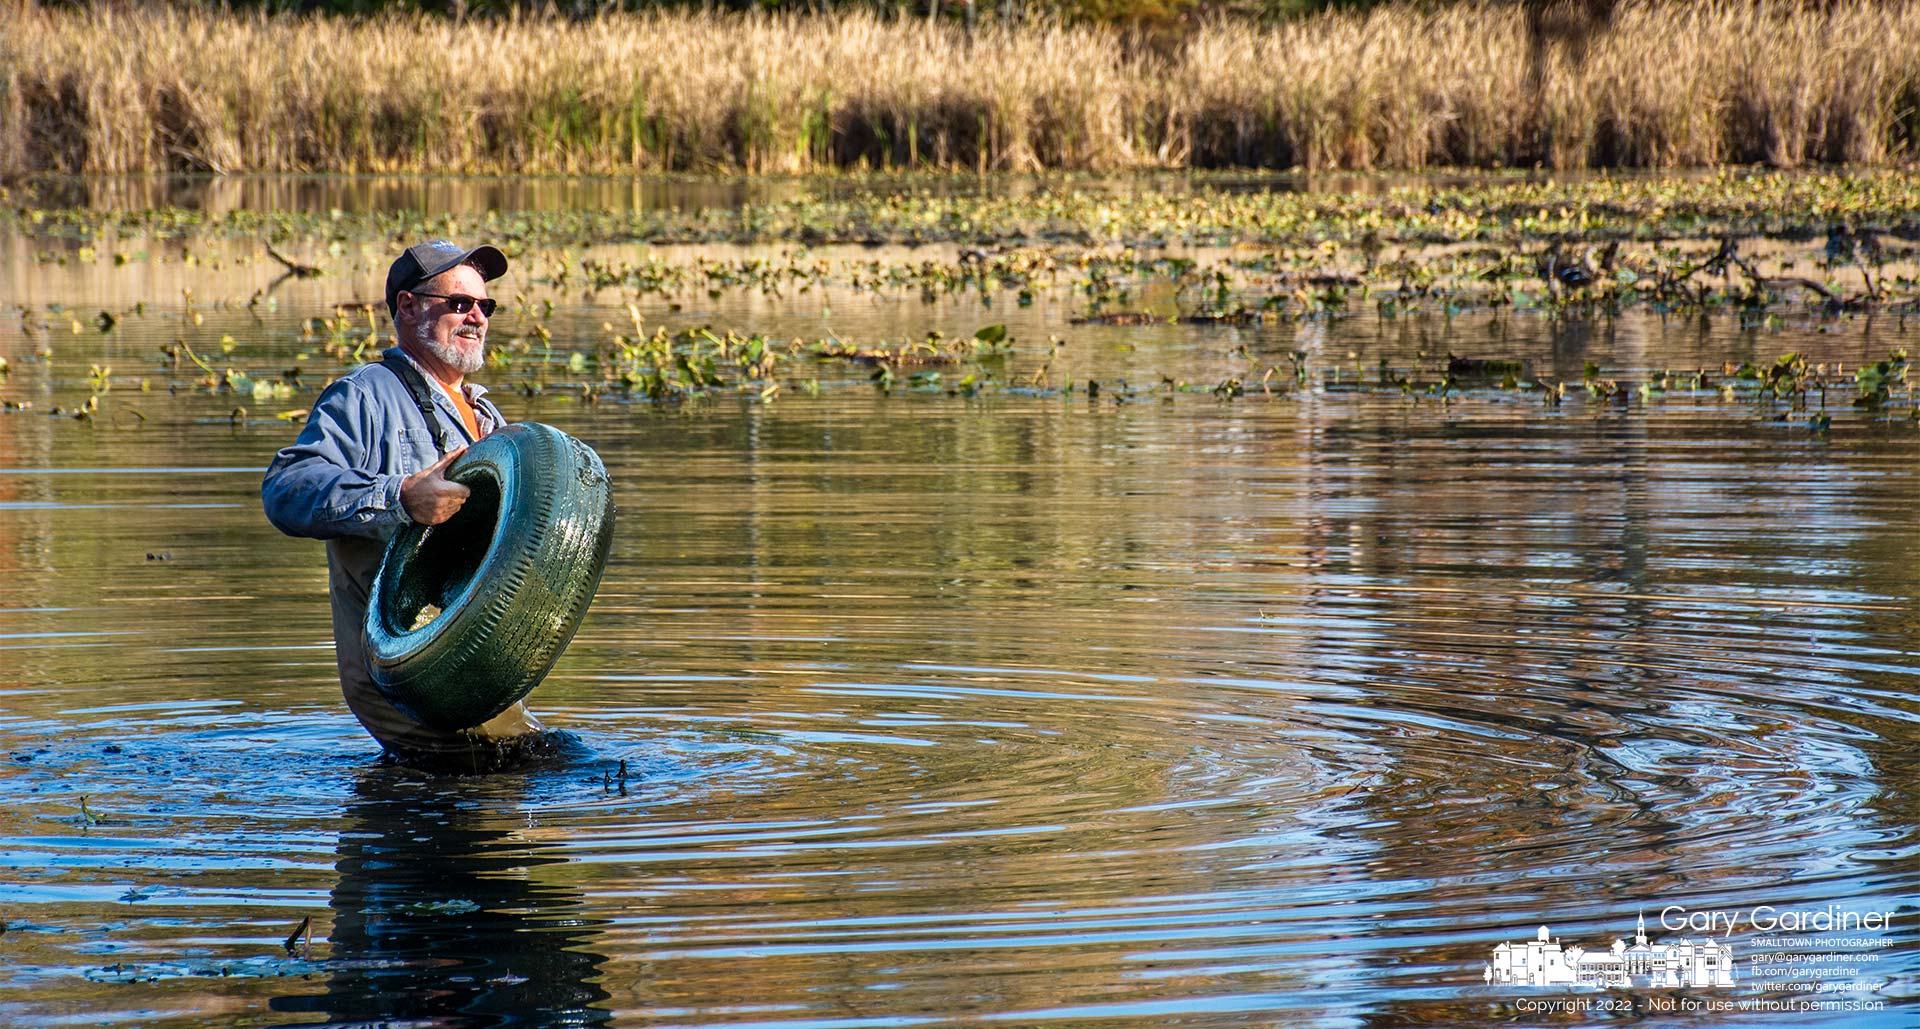 Mark Dilley removes a tire from the pond at Boyer Nature Preserve during Saturday's removal of invasive species, including tires, from the park, My Final Photo for October 22, 2022.